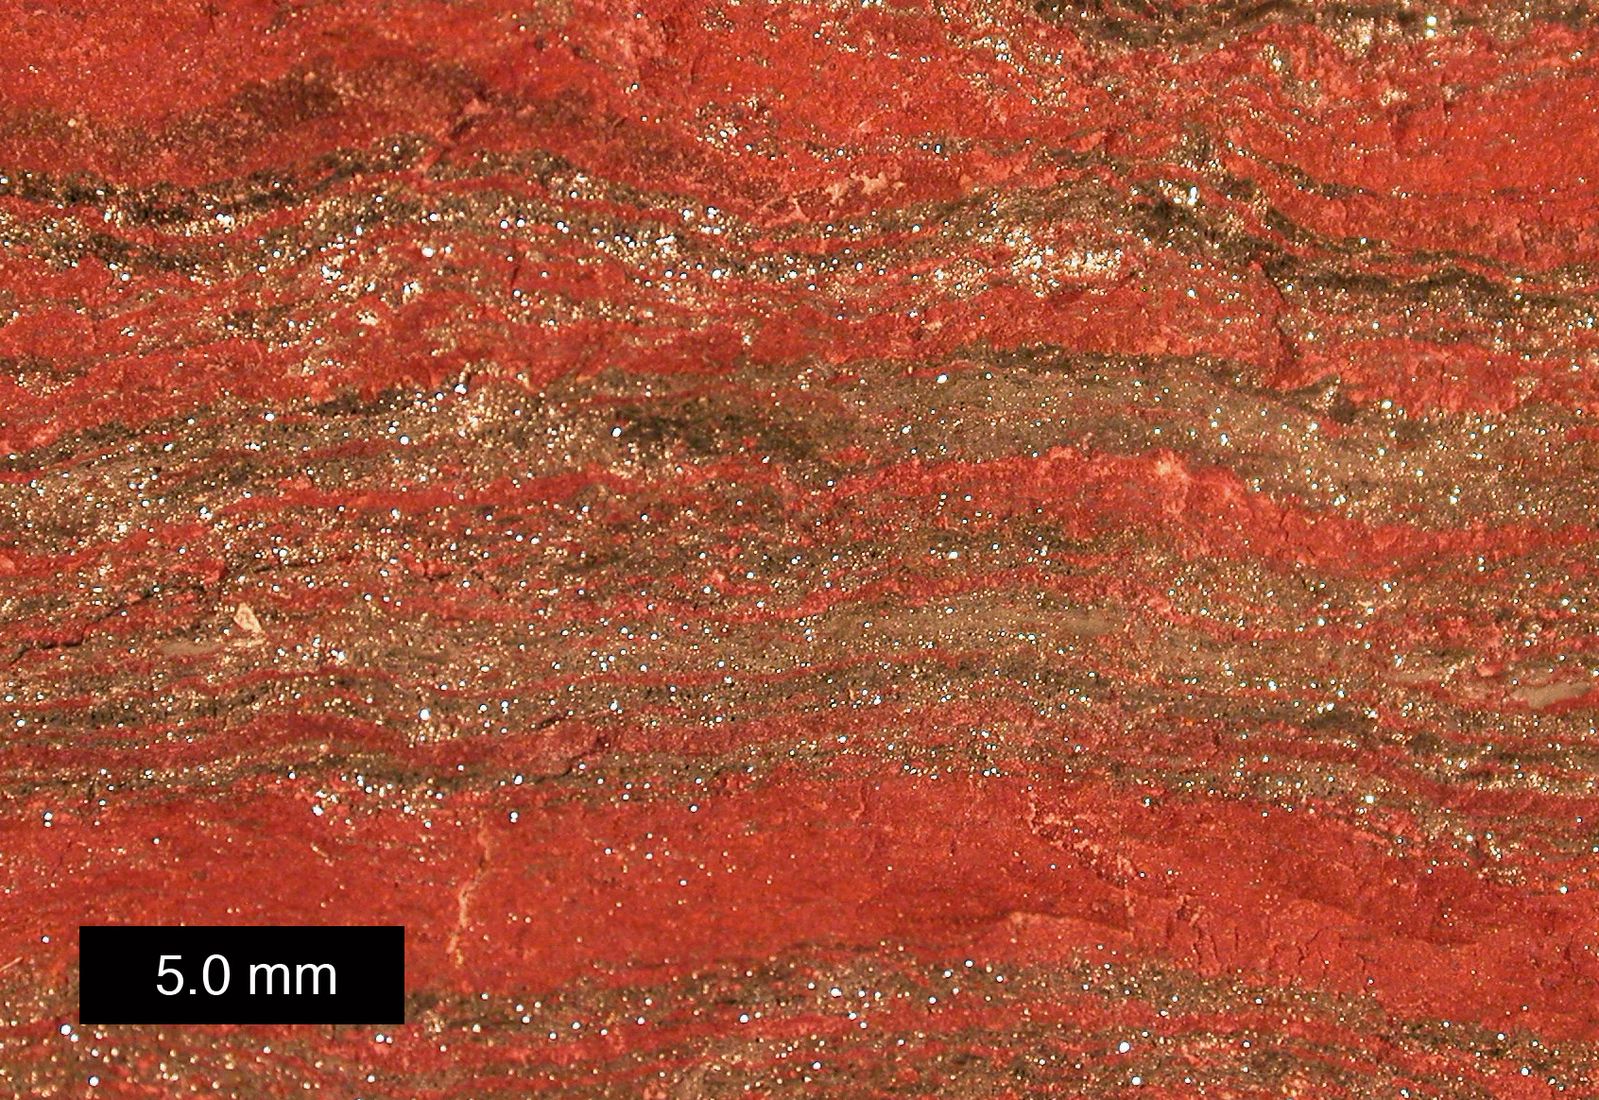 Zoomed-in photo of a slice of rock, showing red and brown layers with glittering dots throughout; a scale bar at the lower left says 5.0 mm.